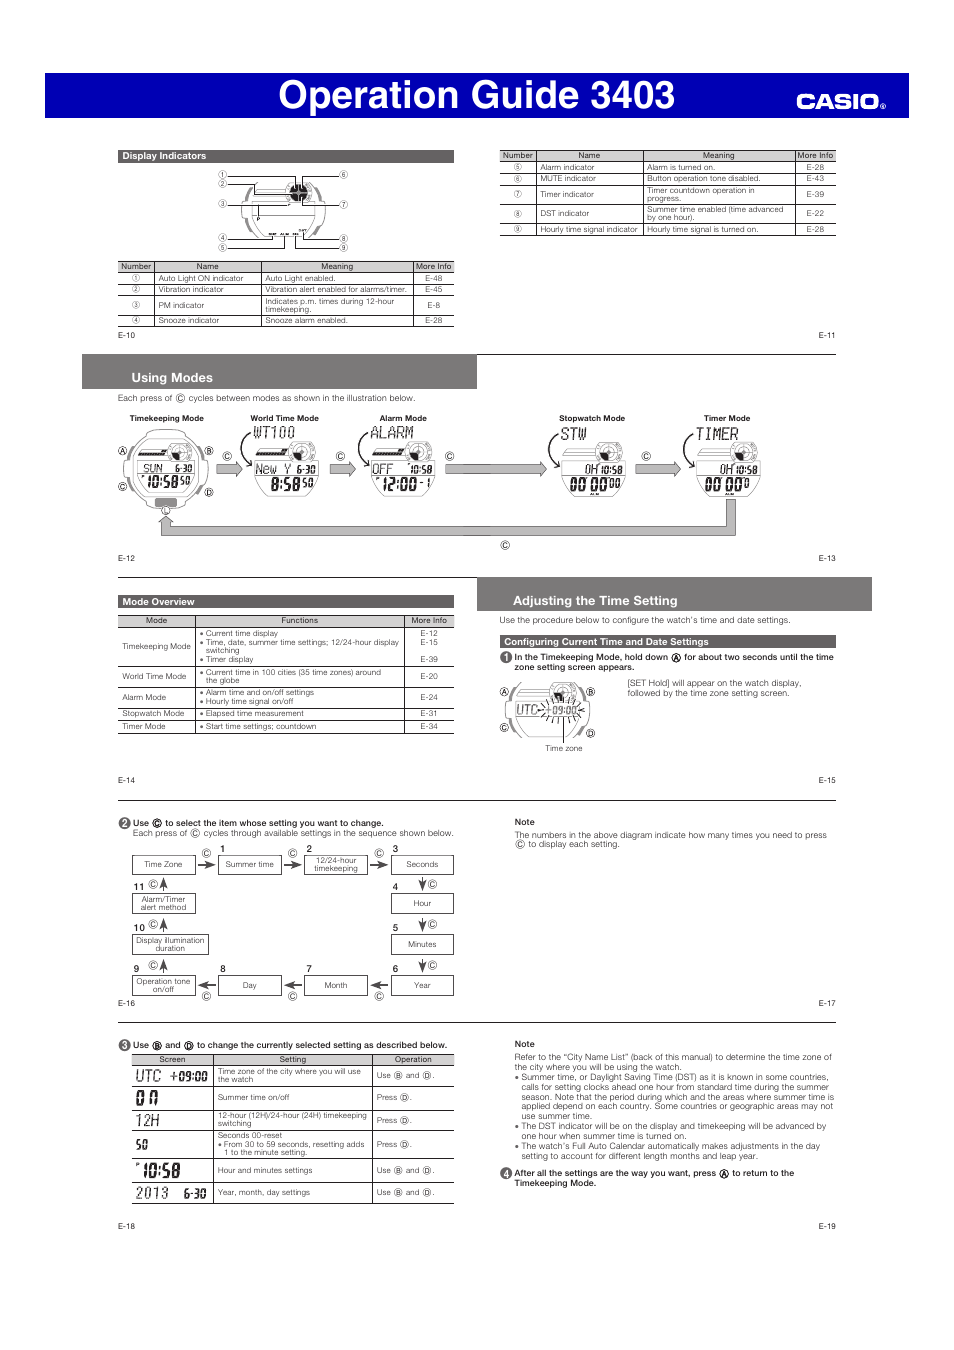 Operation guide 3403 | G-Shock GD-350 User Manual | Page 2 / 7